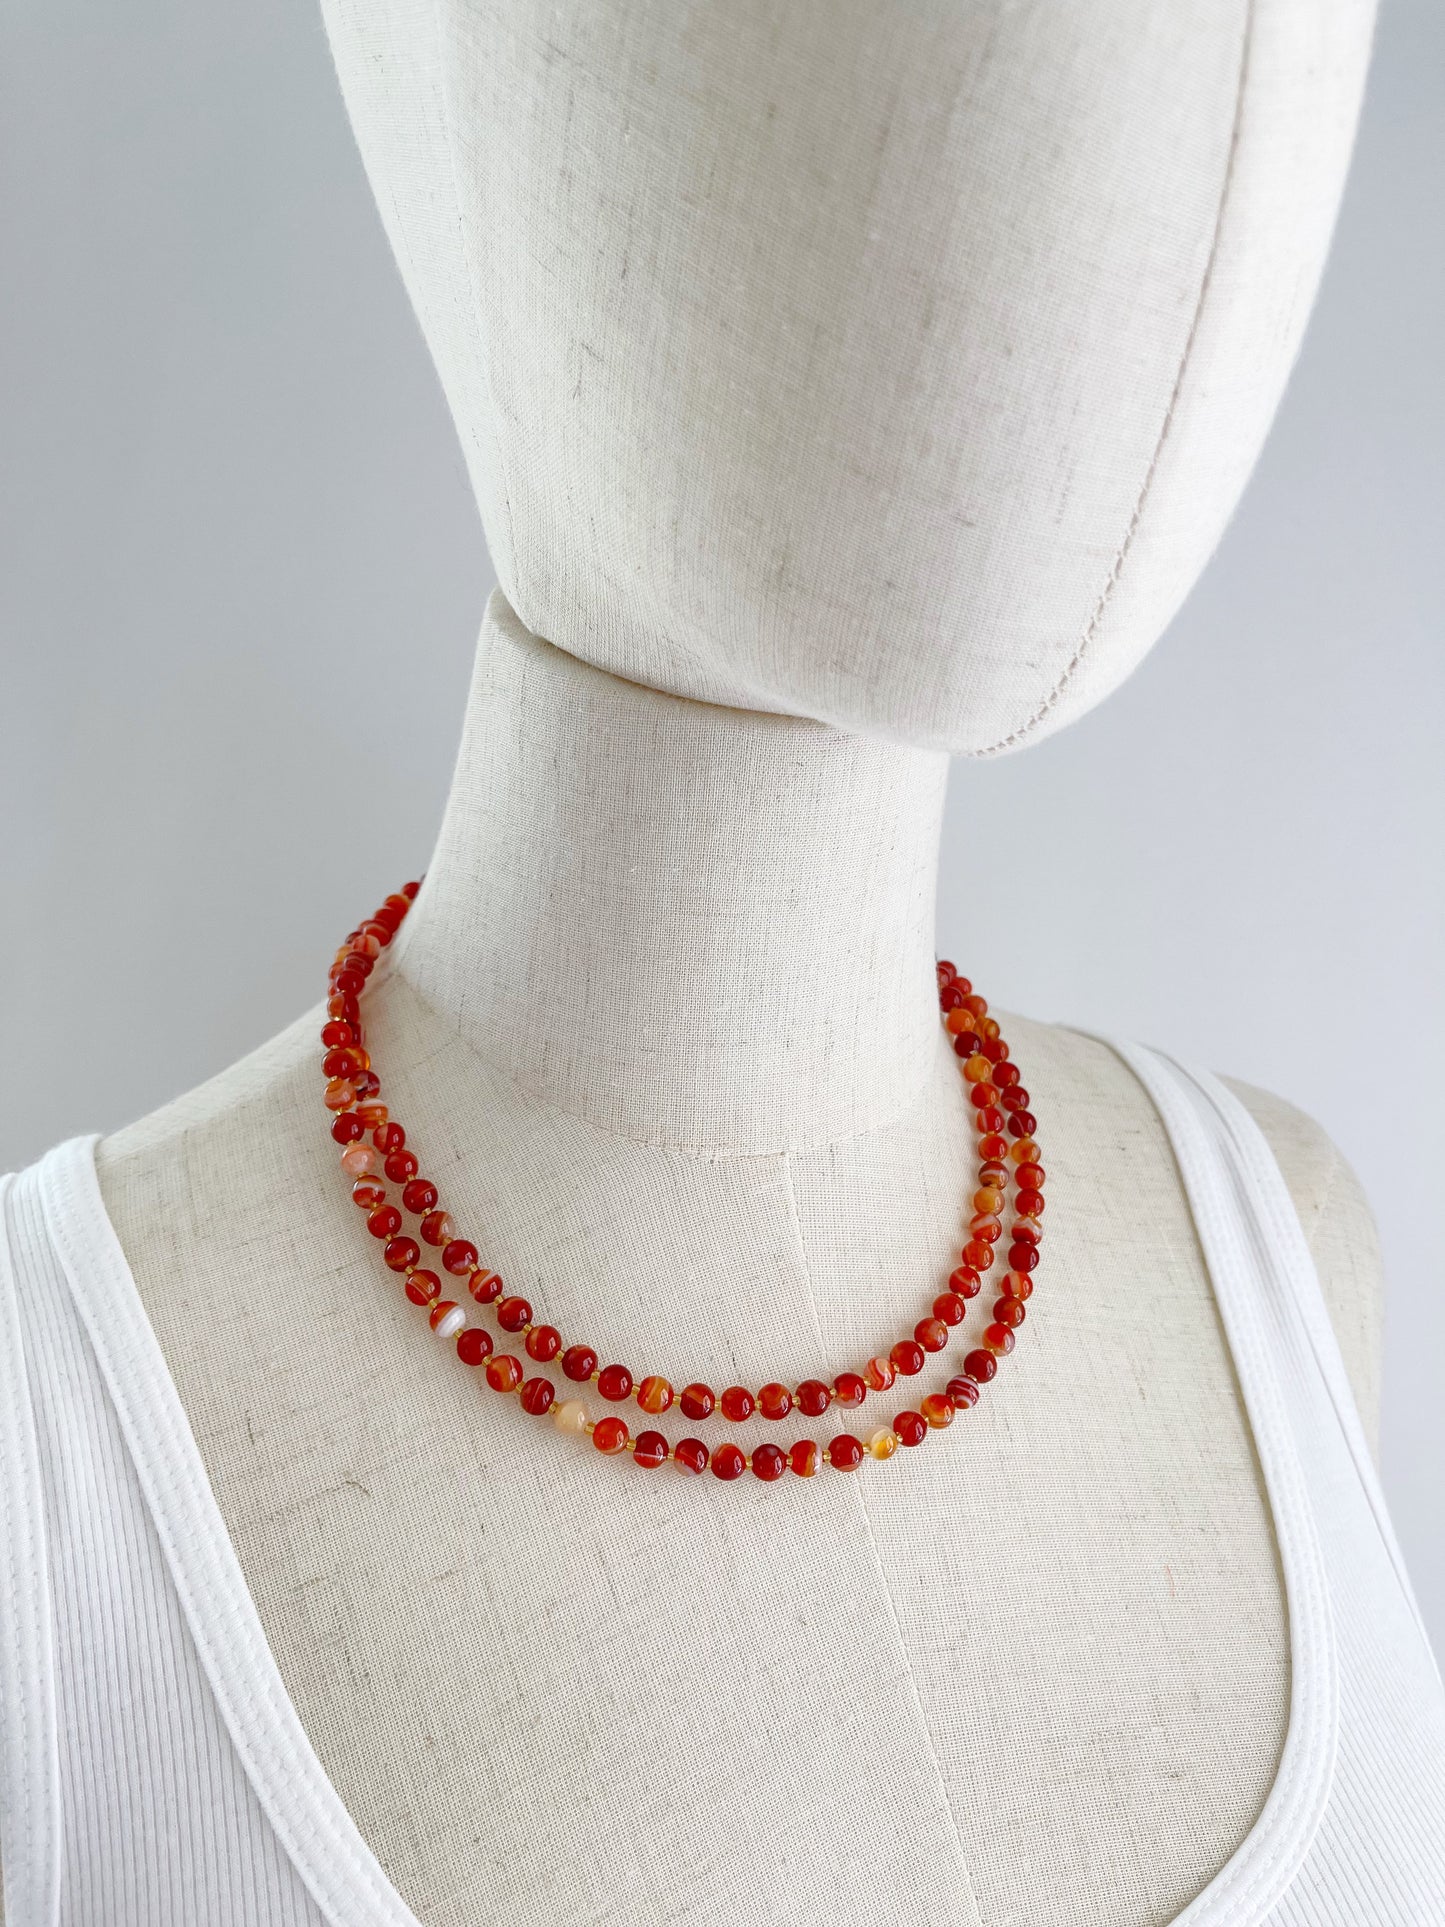 B. 38” Long & double-able necklace of Red Striped Agate